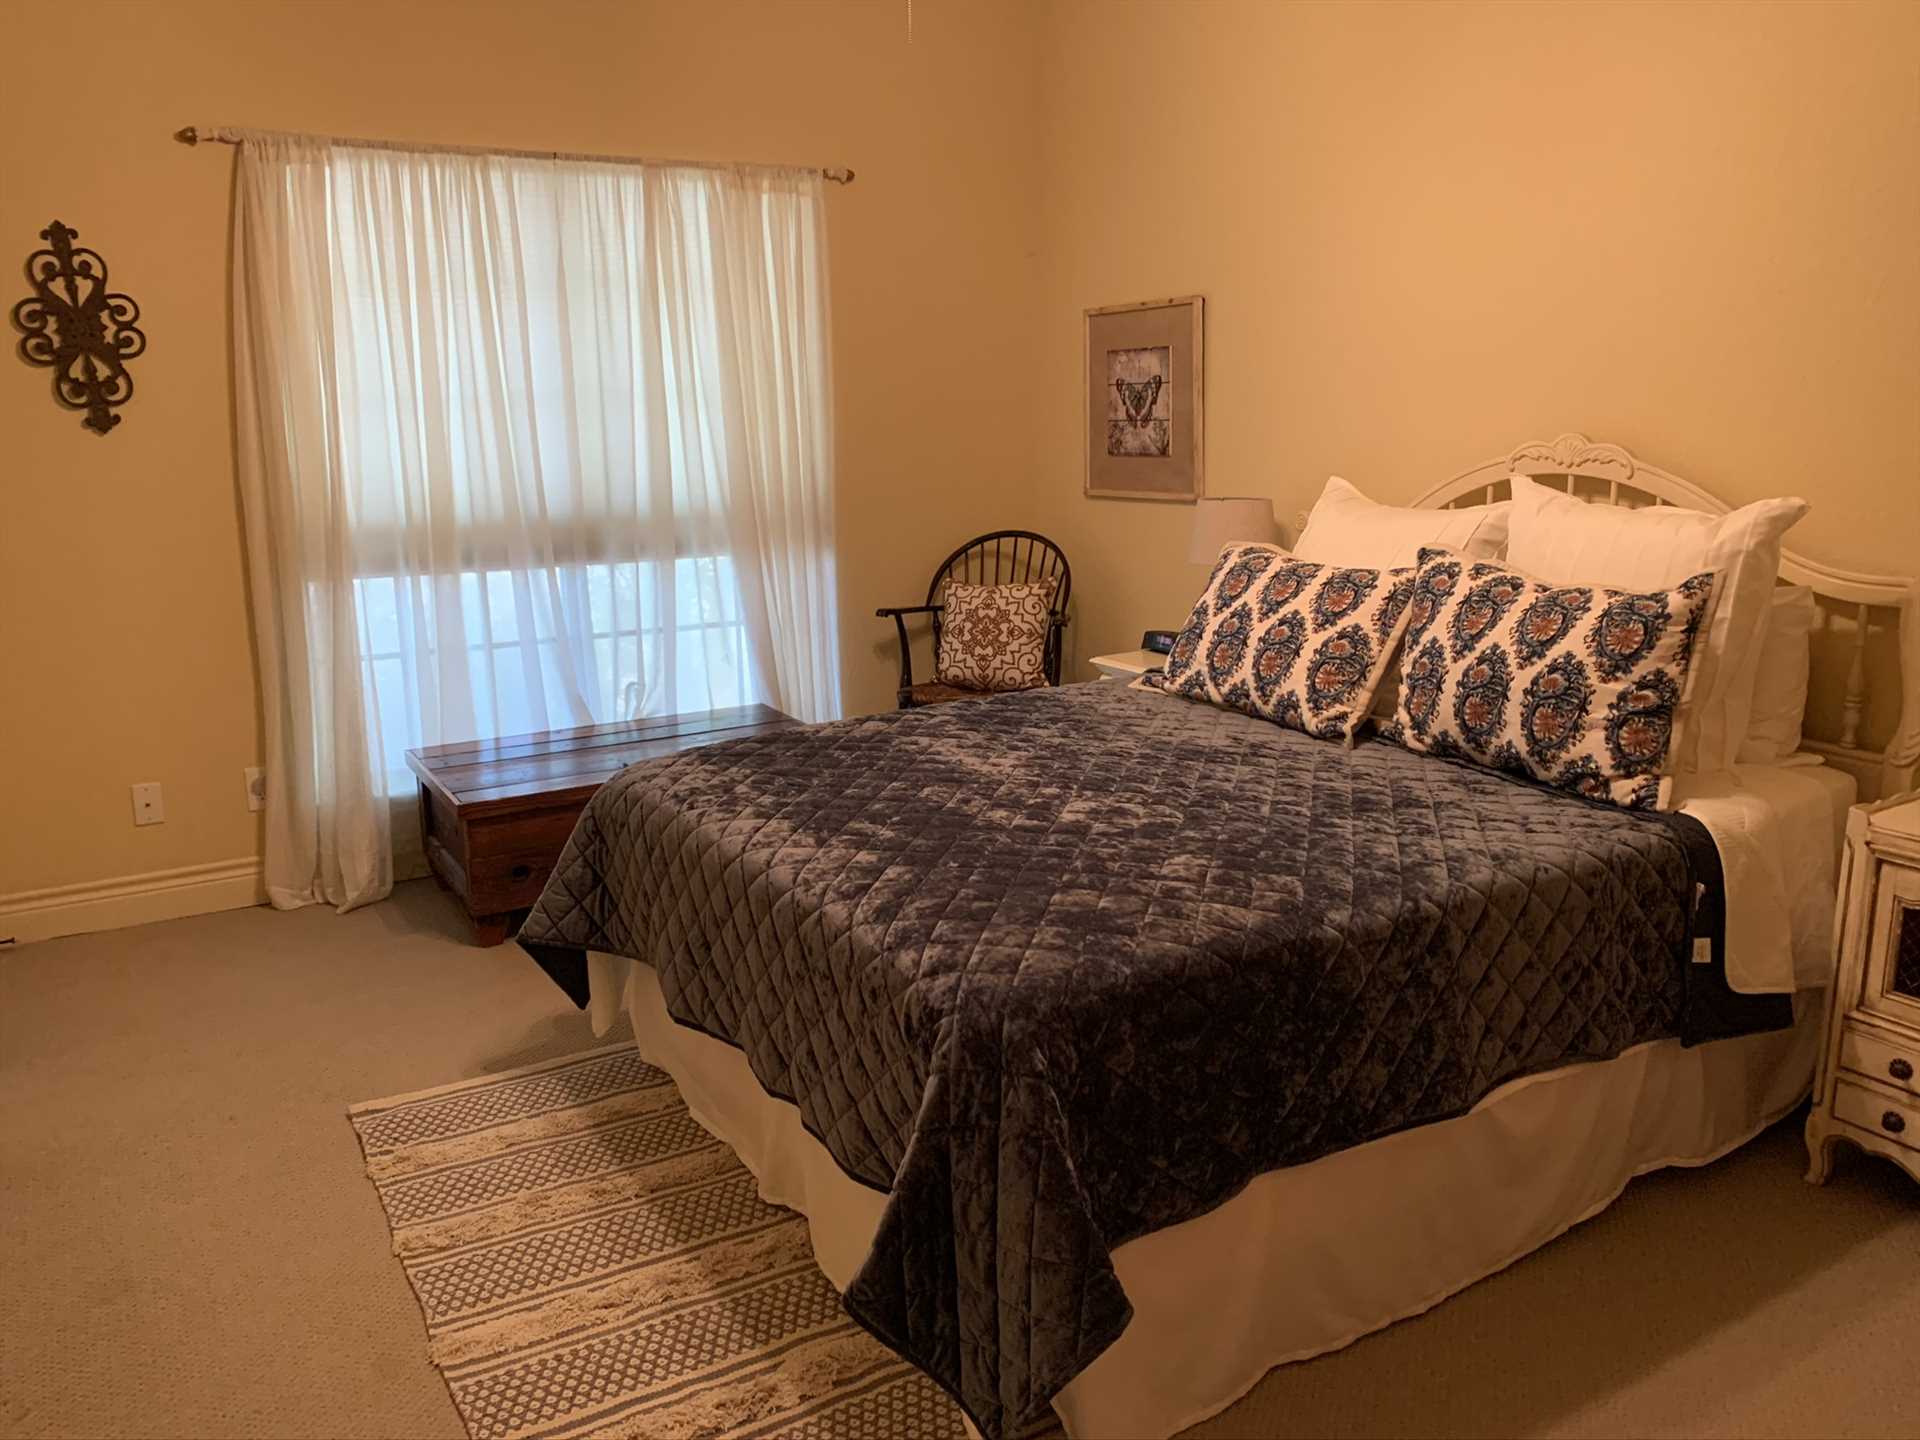                                                 A big queen-sized bed in the second bedroom is a comfy spot for peaceful slumber. As with all the beds in the Retreat, it's draped in clean, complimentary linens.